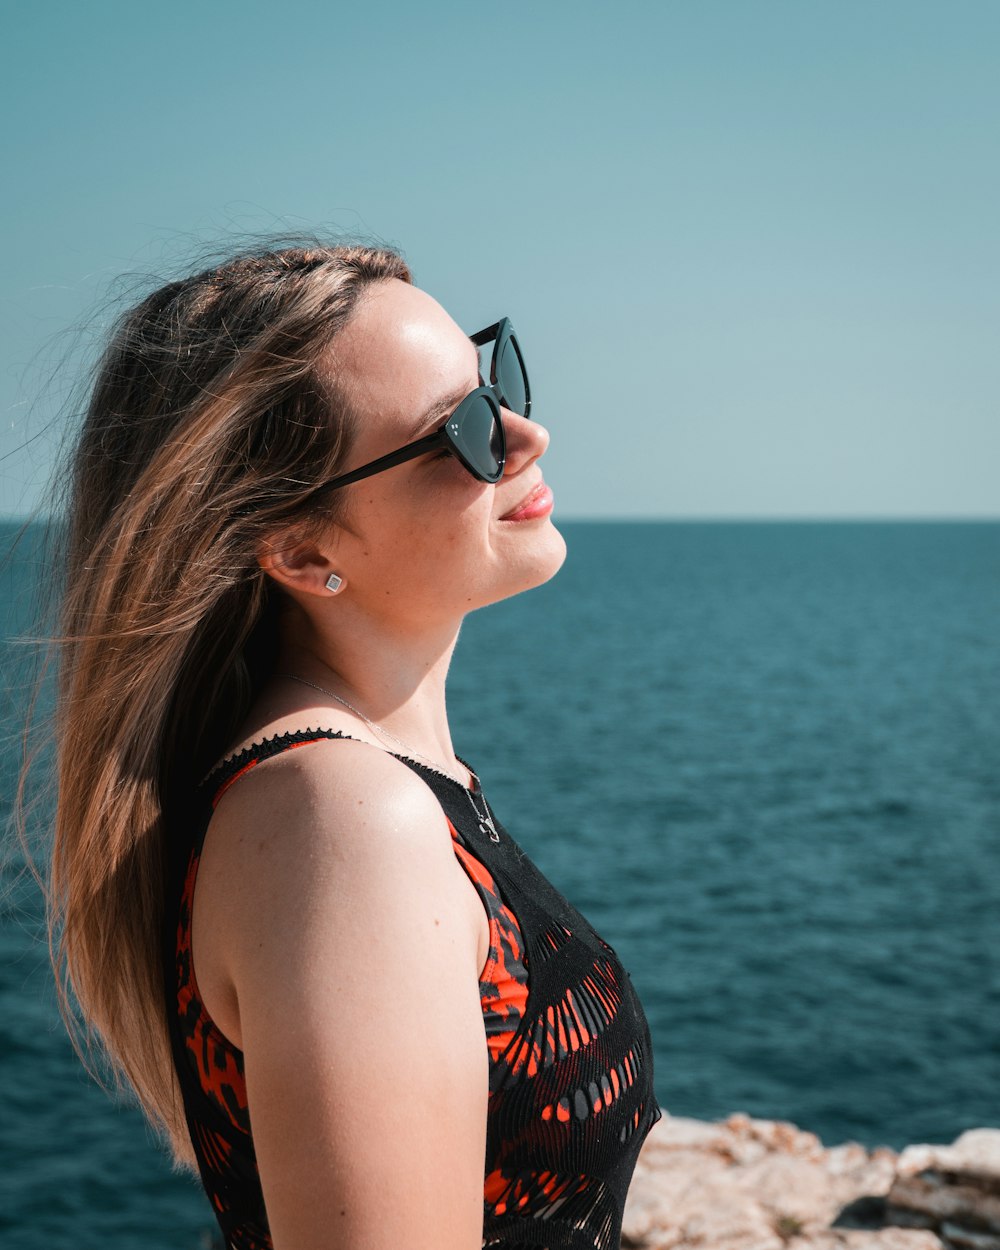 a woman wearing sunglasses looking out over the water